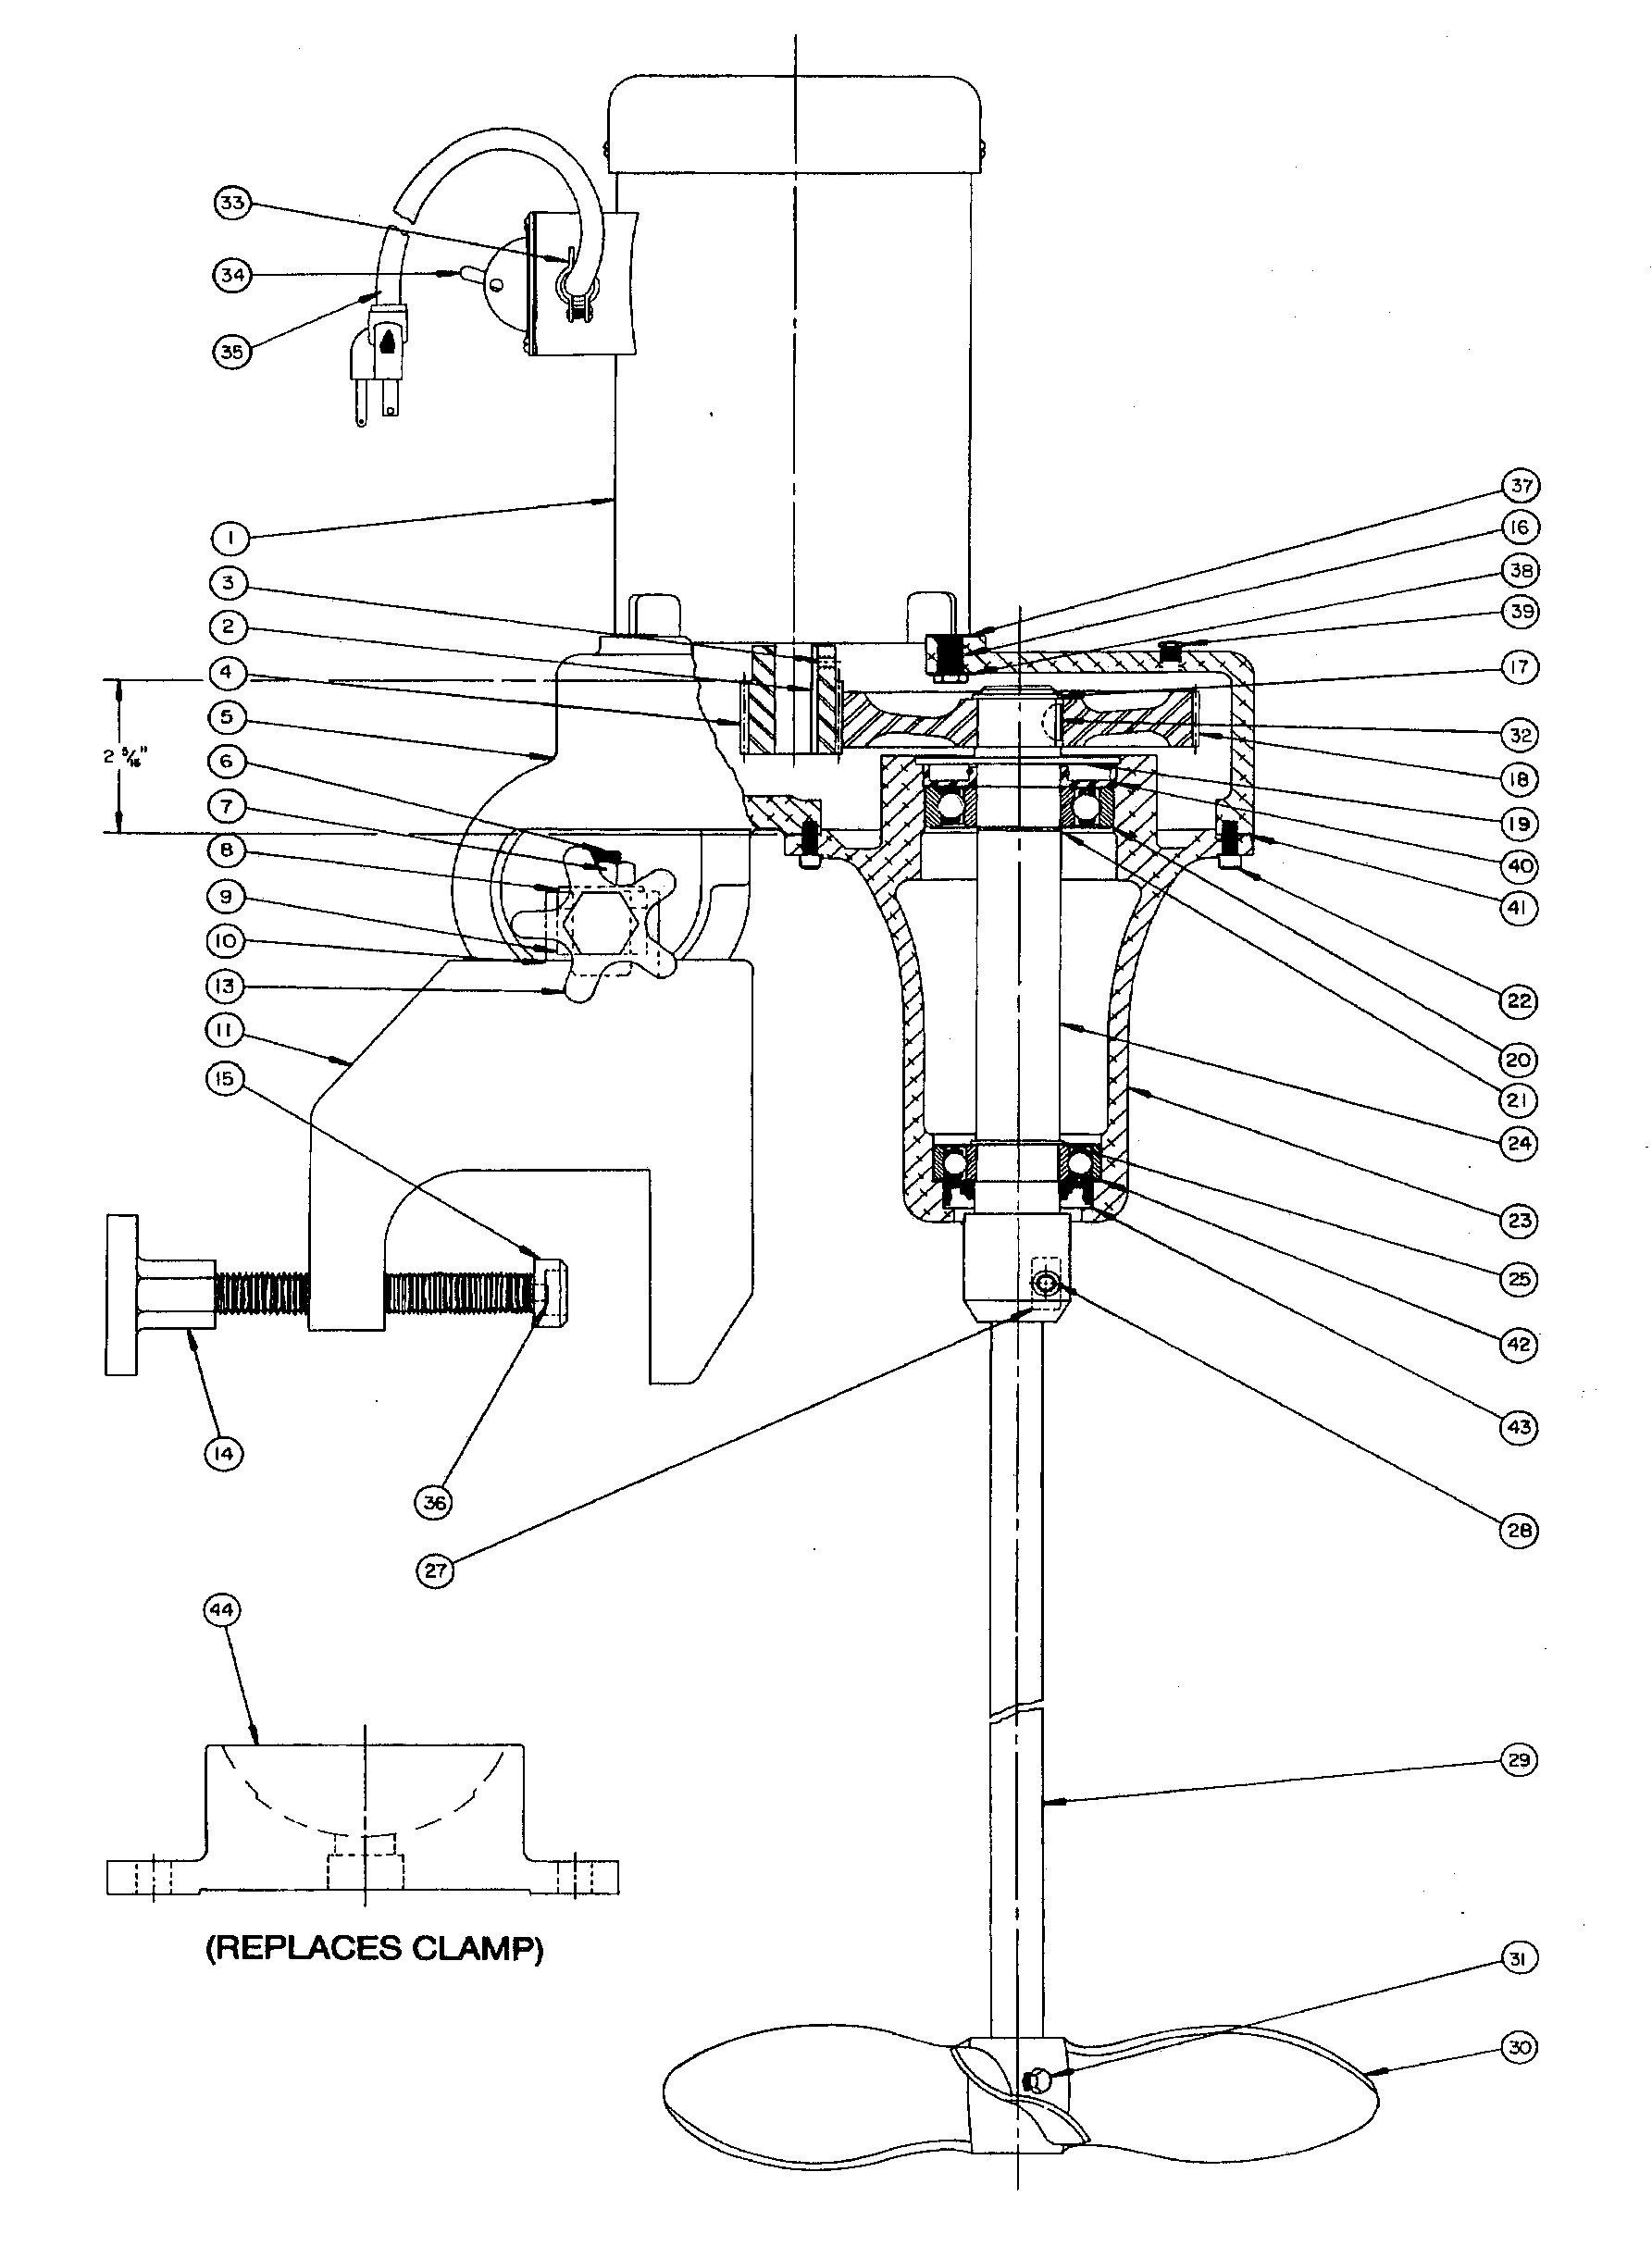 MixMor Model G Part Drawing